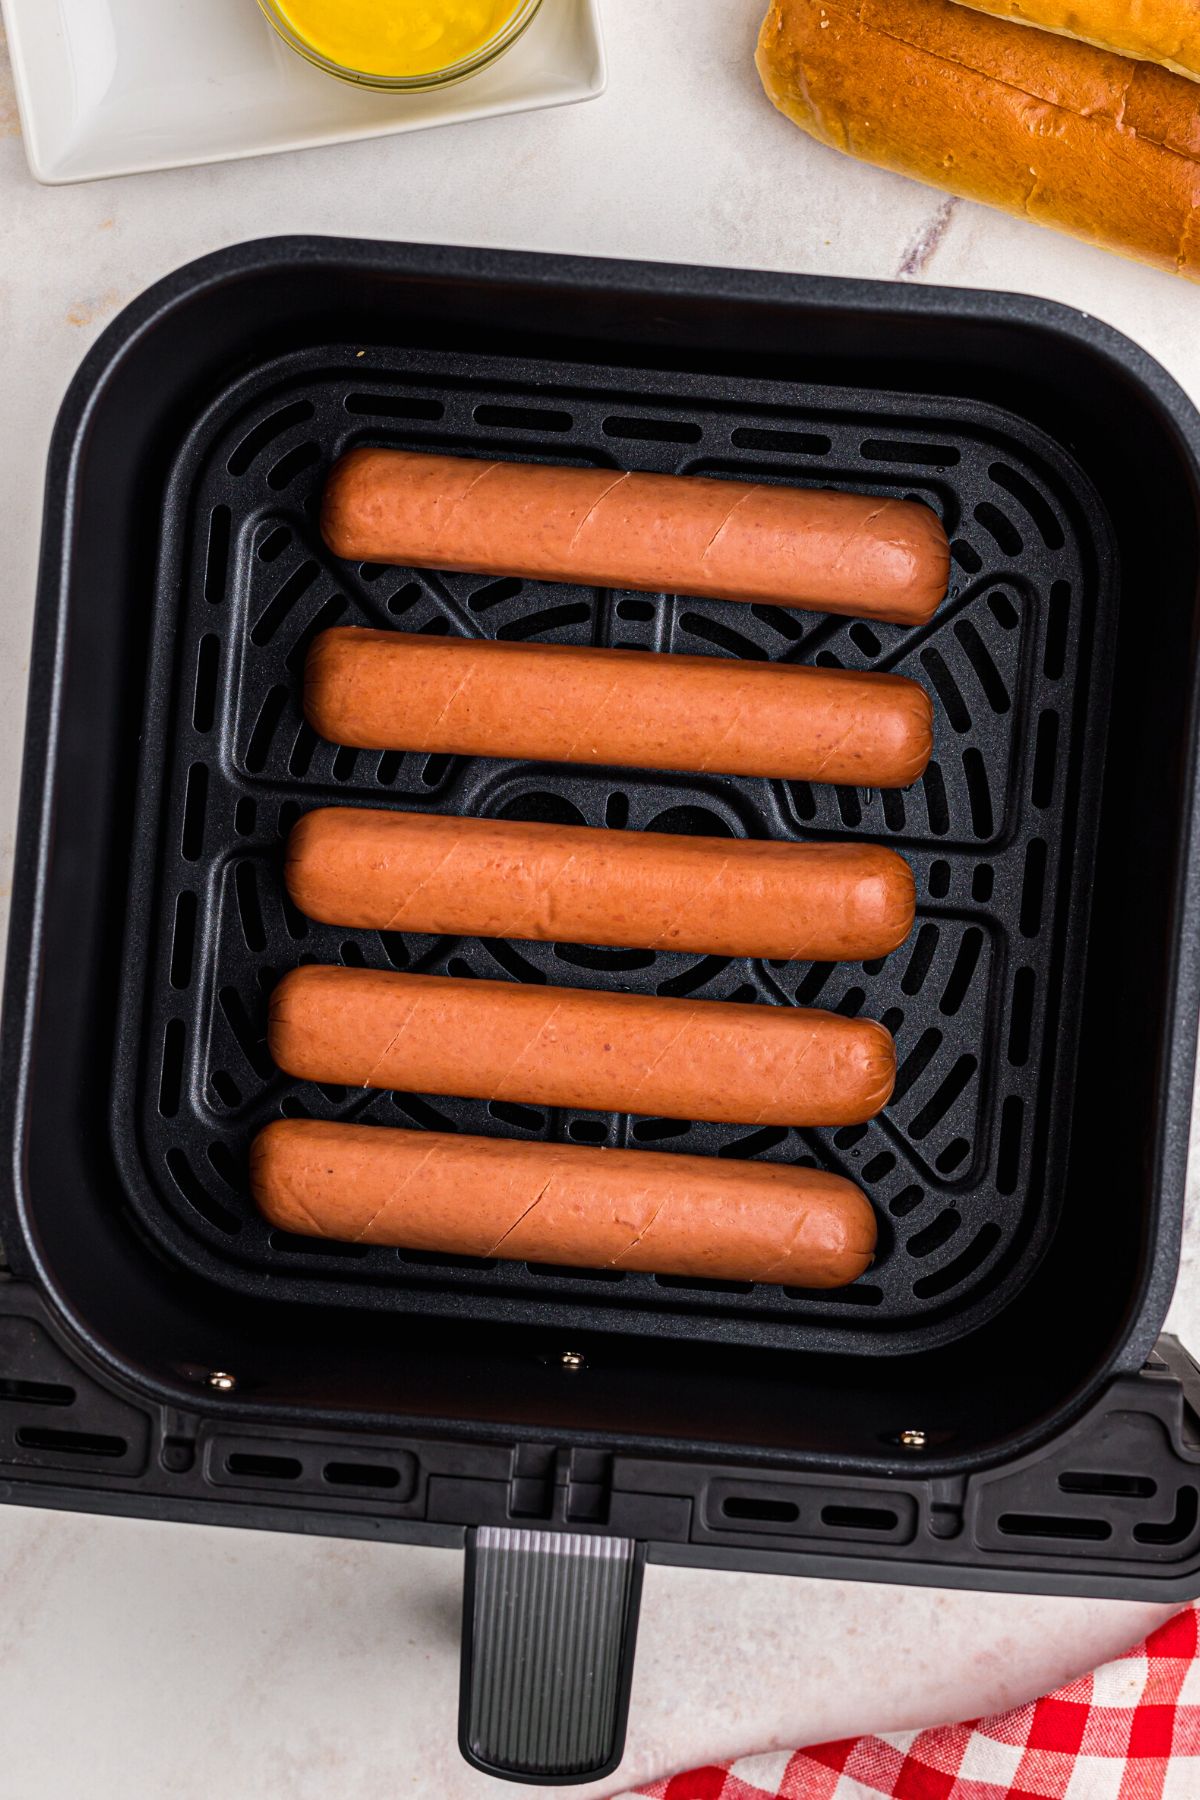 Hot dogs with slits cut into them placed in the air fryer basket before cooking